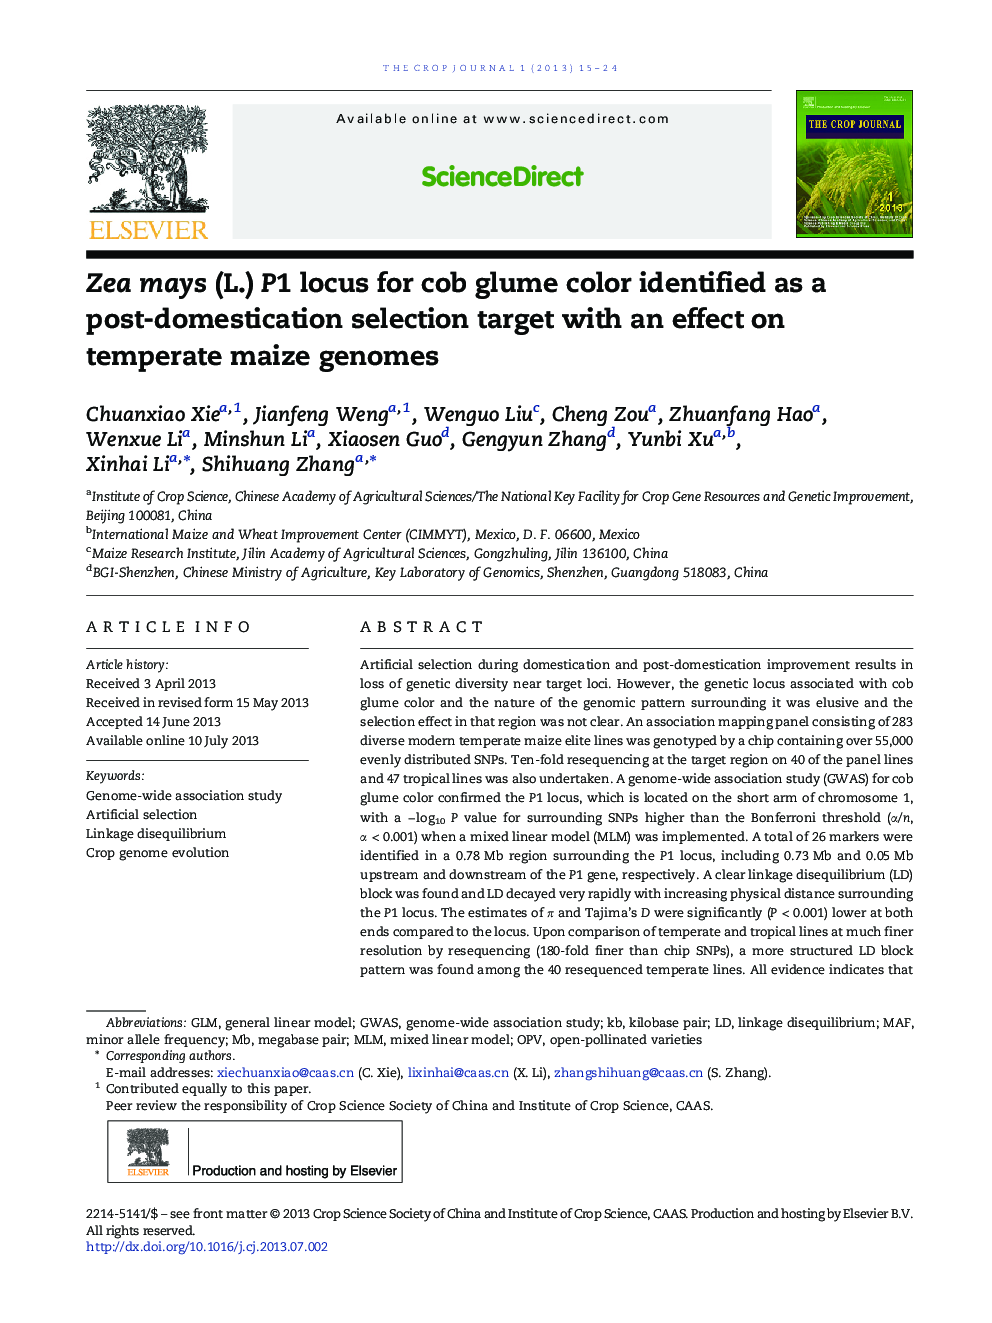 Zea mays (L.) P1 locus for cob glume color identified as a post-domestication selection target with an effect on temperate maize genomes 